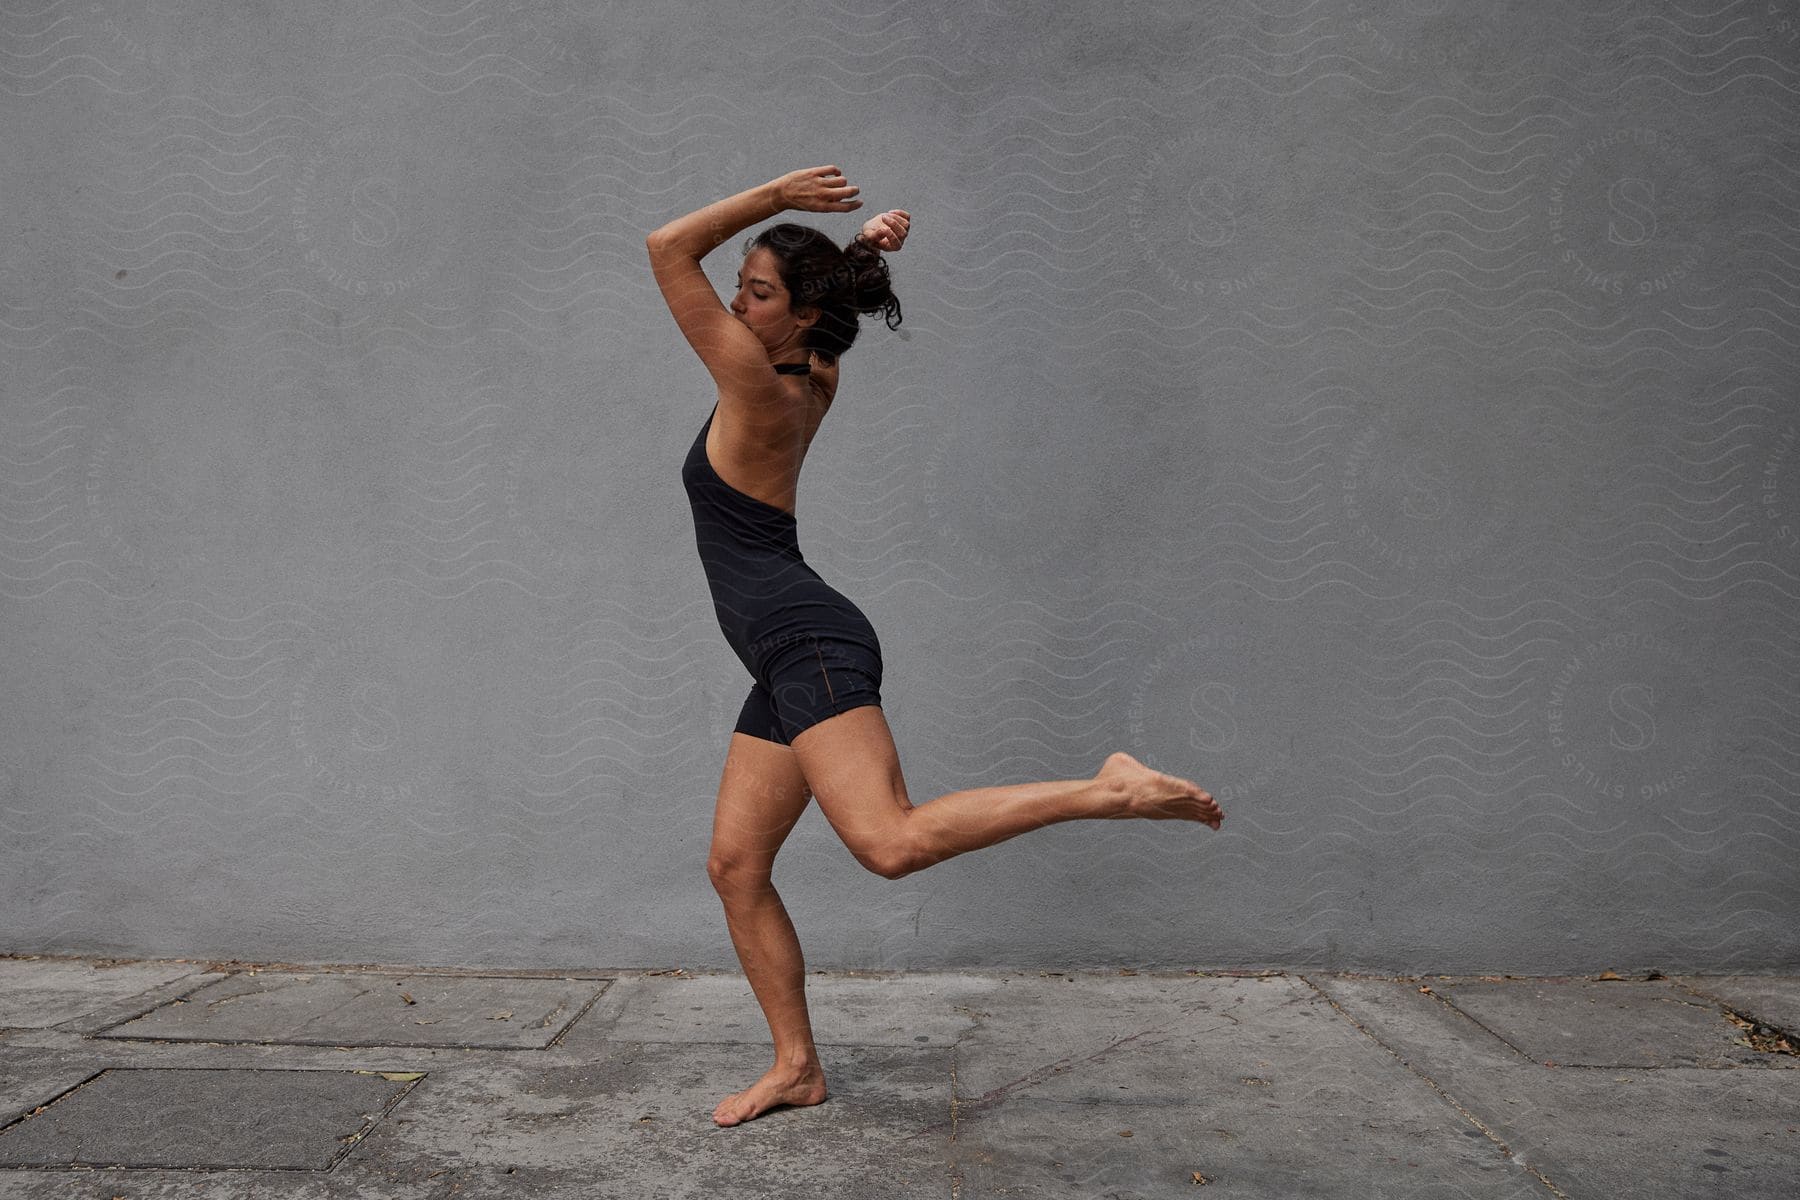 Woman with a black top and shorts dances in front of a gray wall on the street